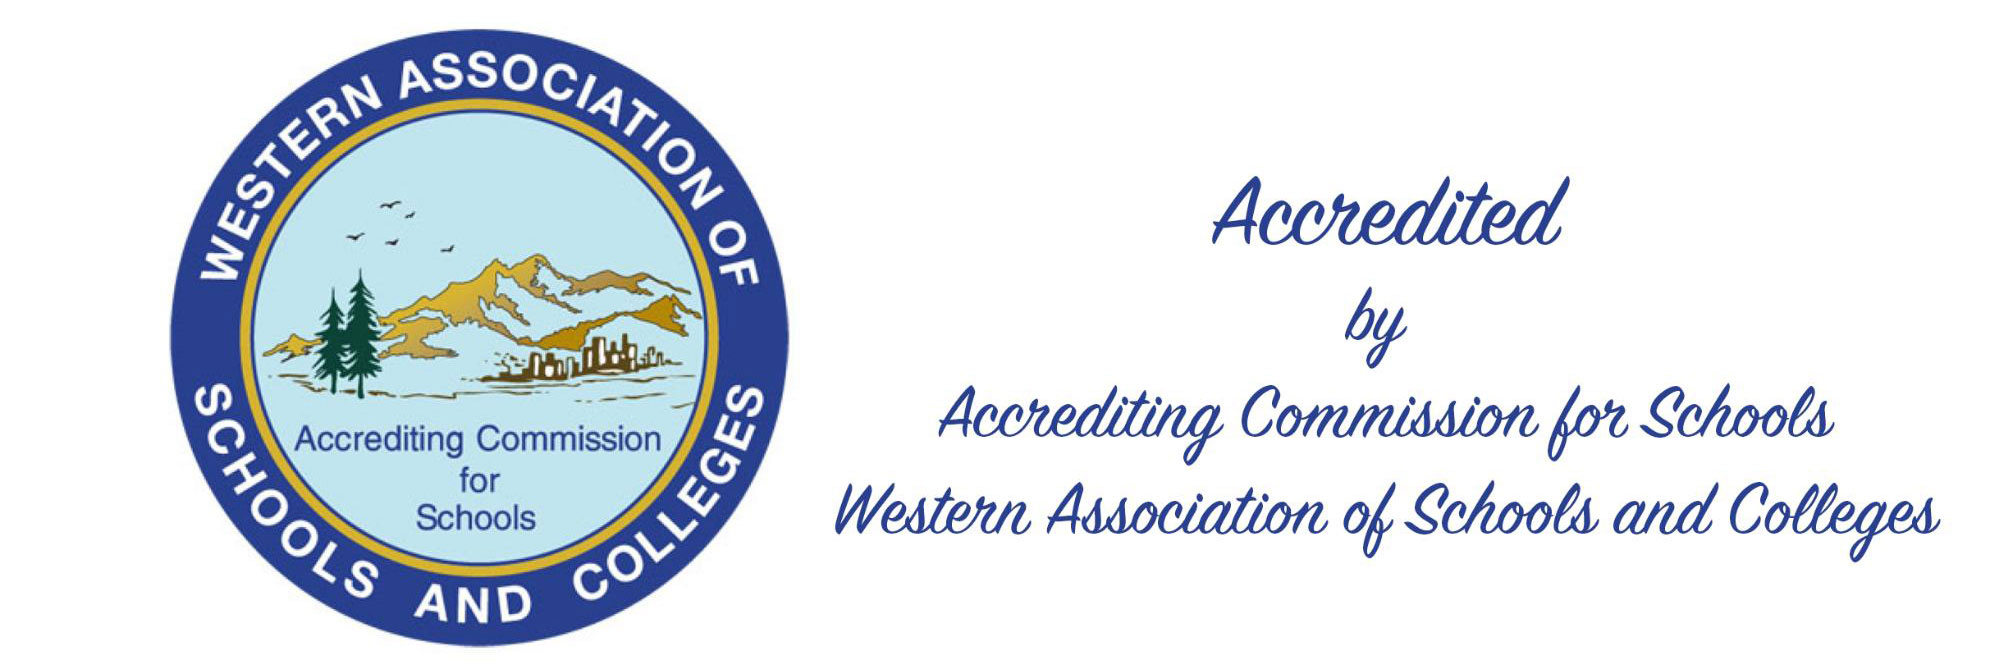 Western Association of Schools and Colleges Accreditation Logo - CCS is WASC Accredited